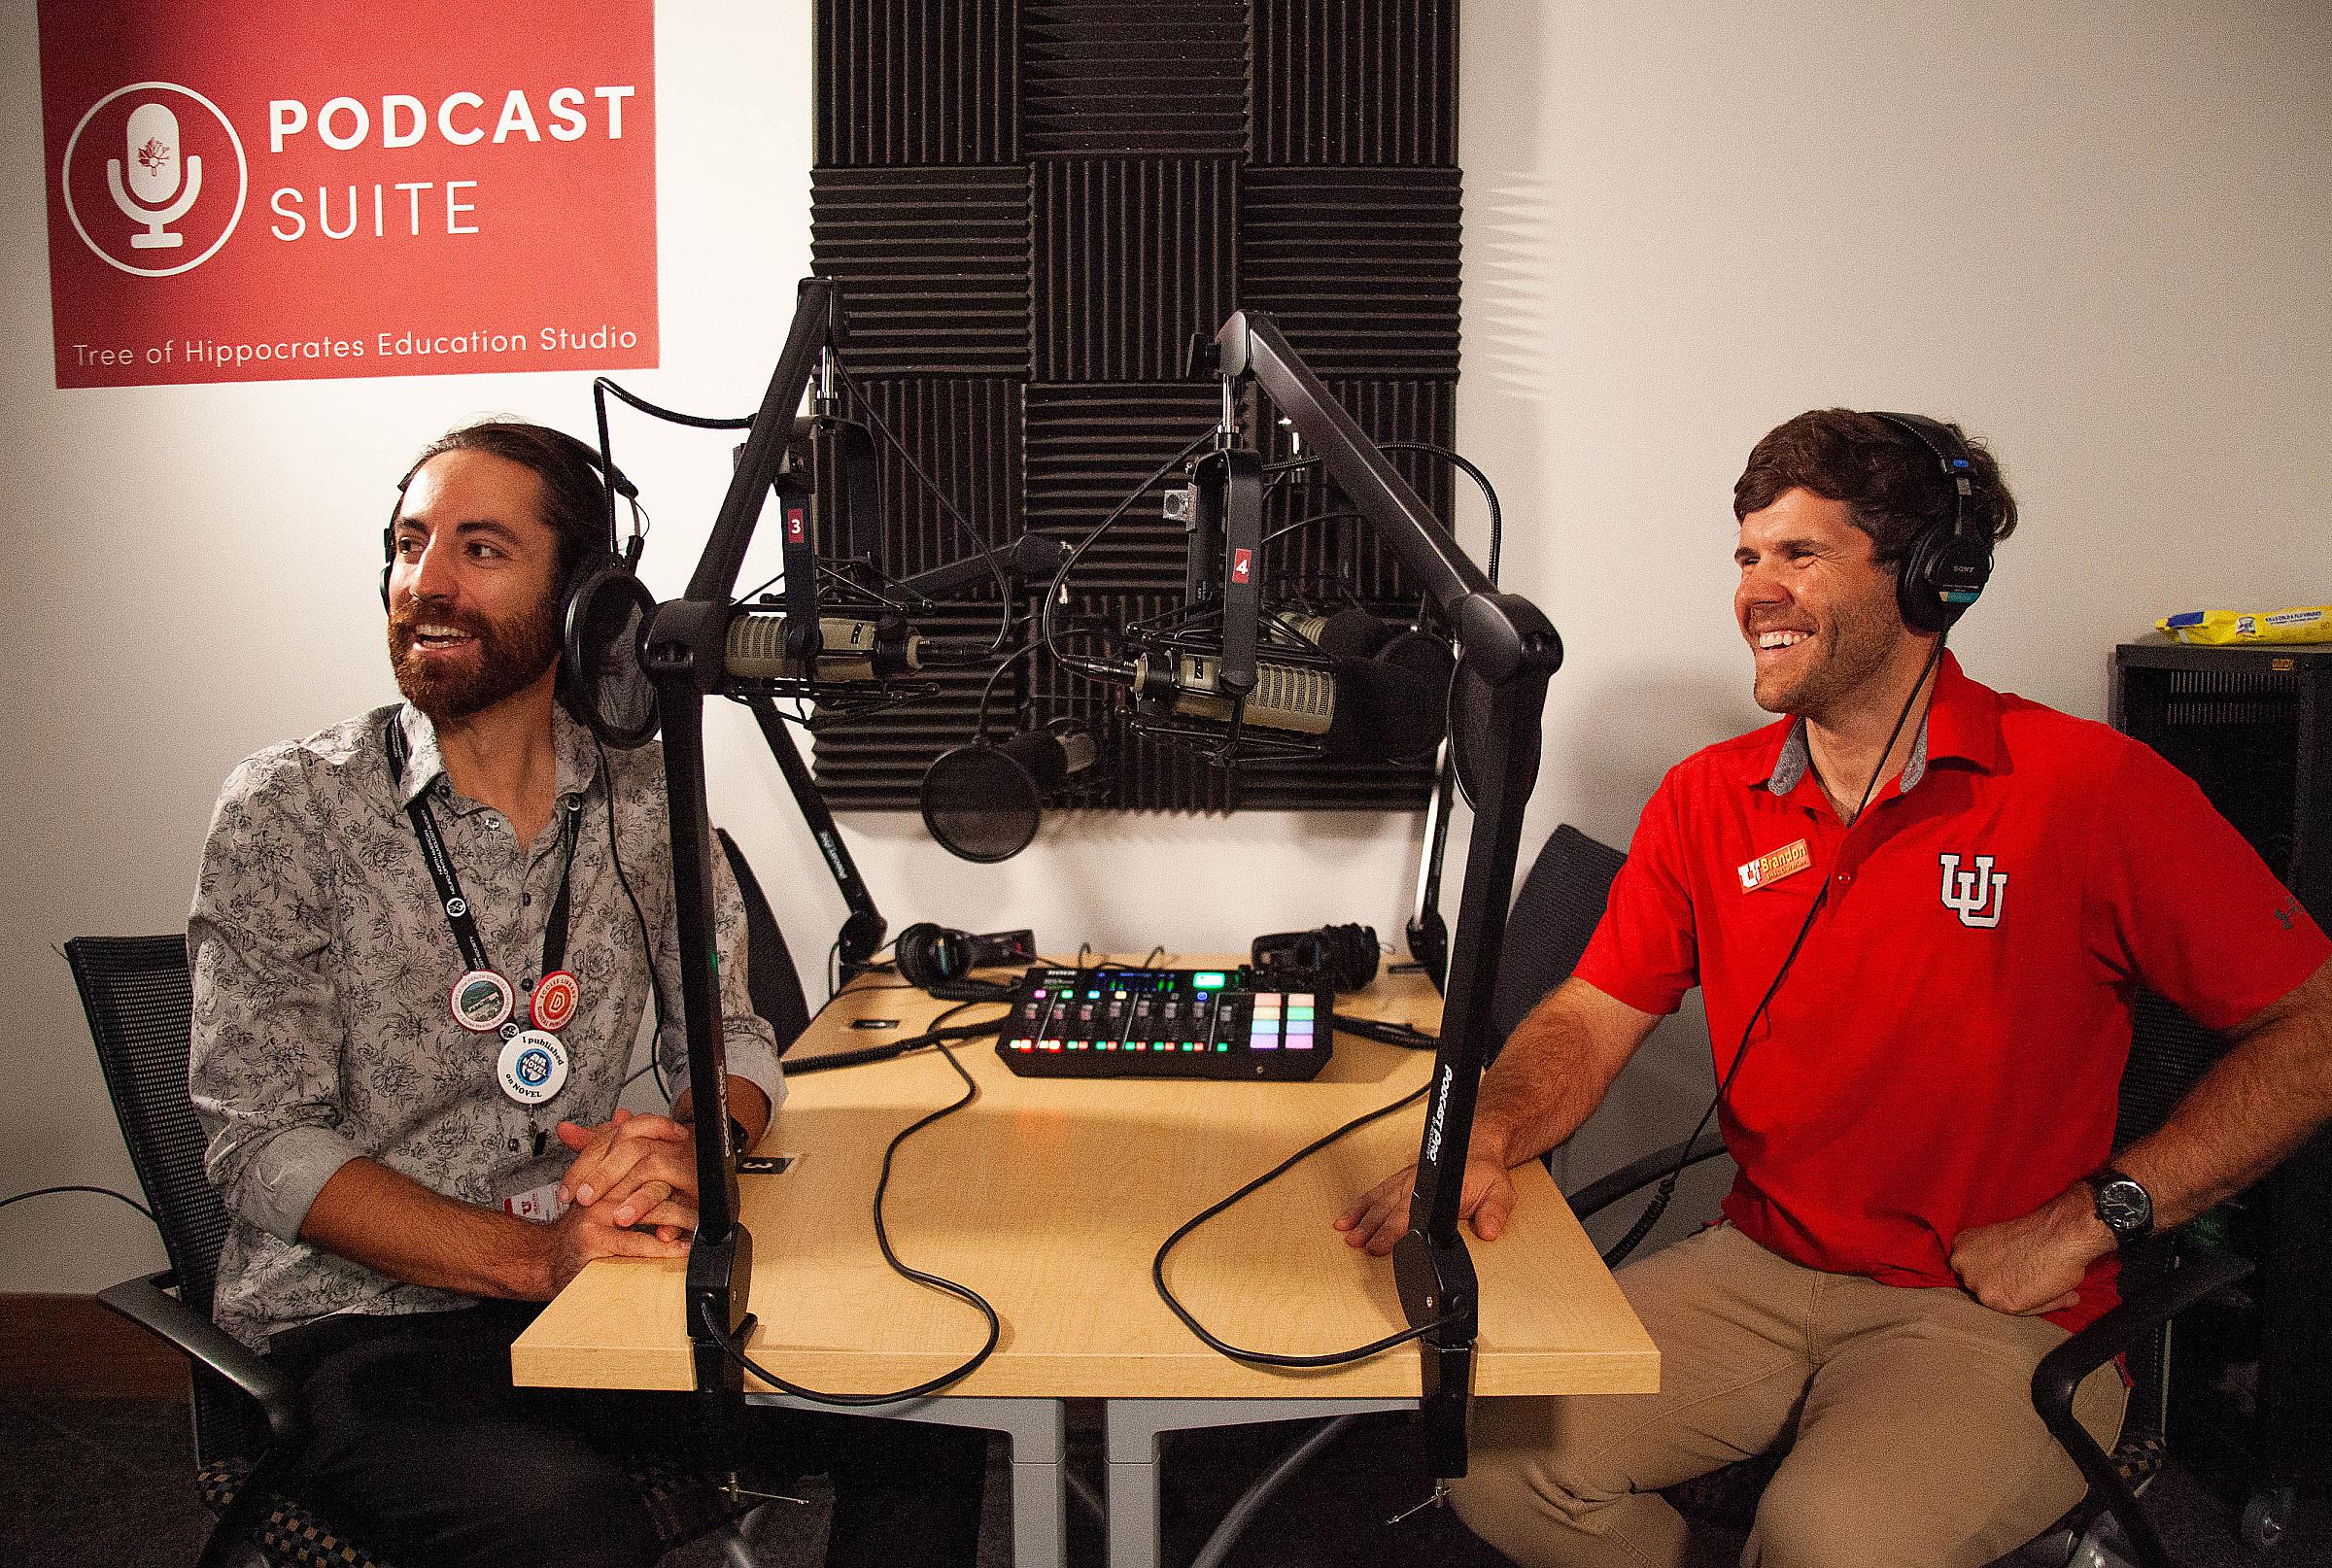 Bryan Hull and Brandon Patterson demonstrate the functions of the Tree of Hippocrates Education Studio (THE Studio), a fully equipped multimedia lab where students, staff, and faculty can create professional quality audio and video recordings.